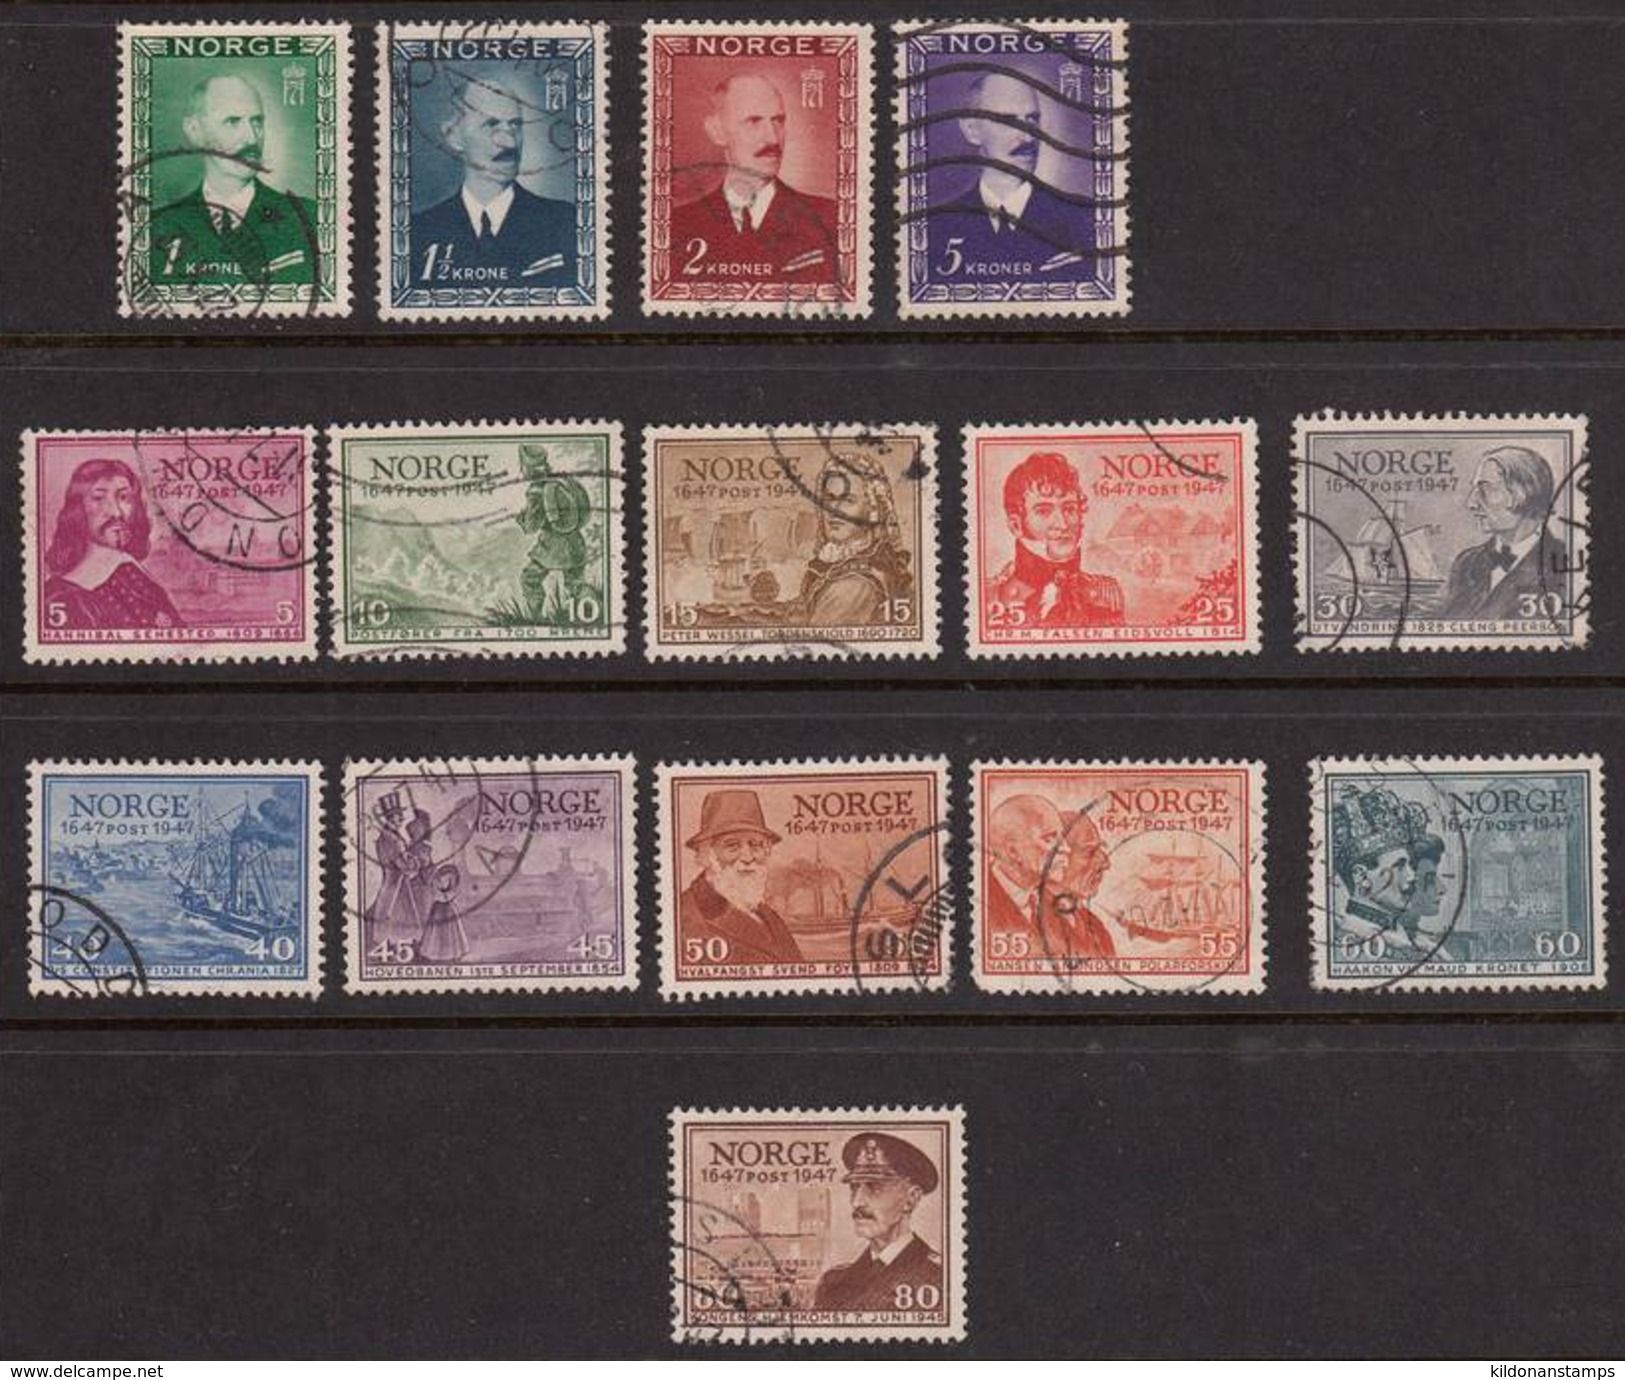 Norway 1946-47 Full Sets, Cancelled, Sc 275-278, 279-289 - Used Stamps